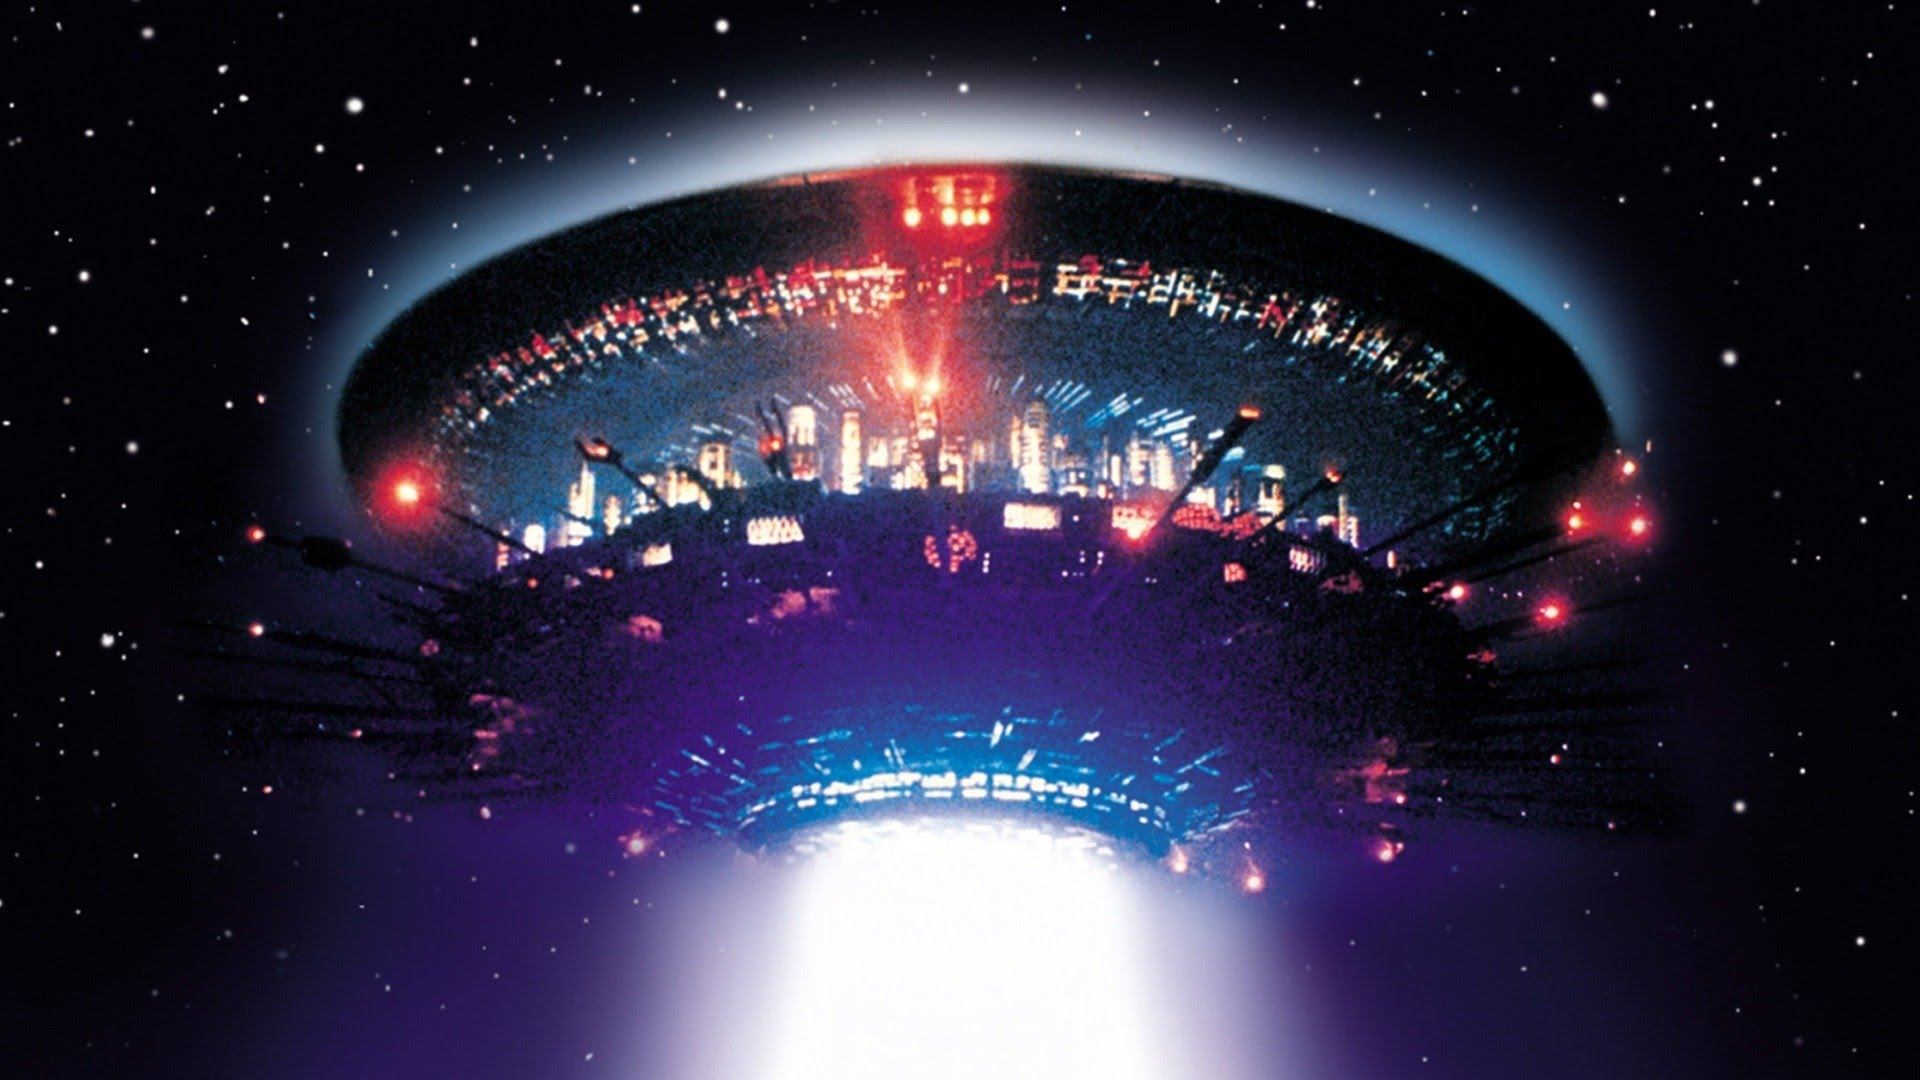 A spaceship, shaped like a tall circular stack, with lights surrounding it on all sides